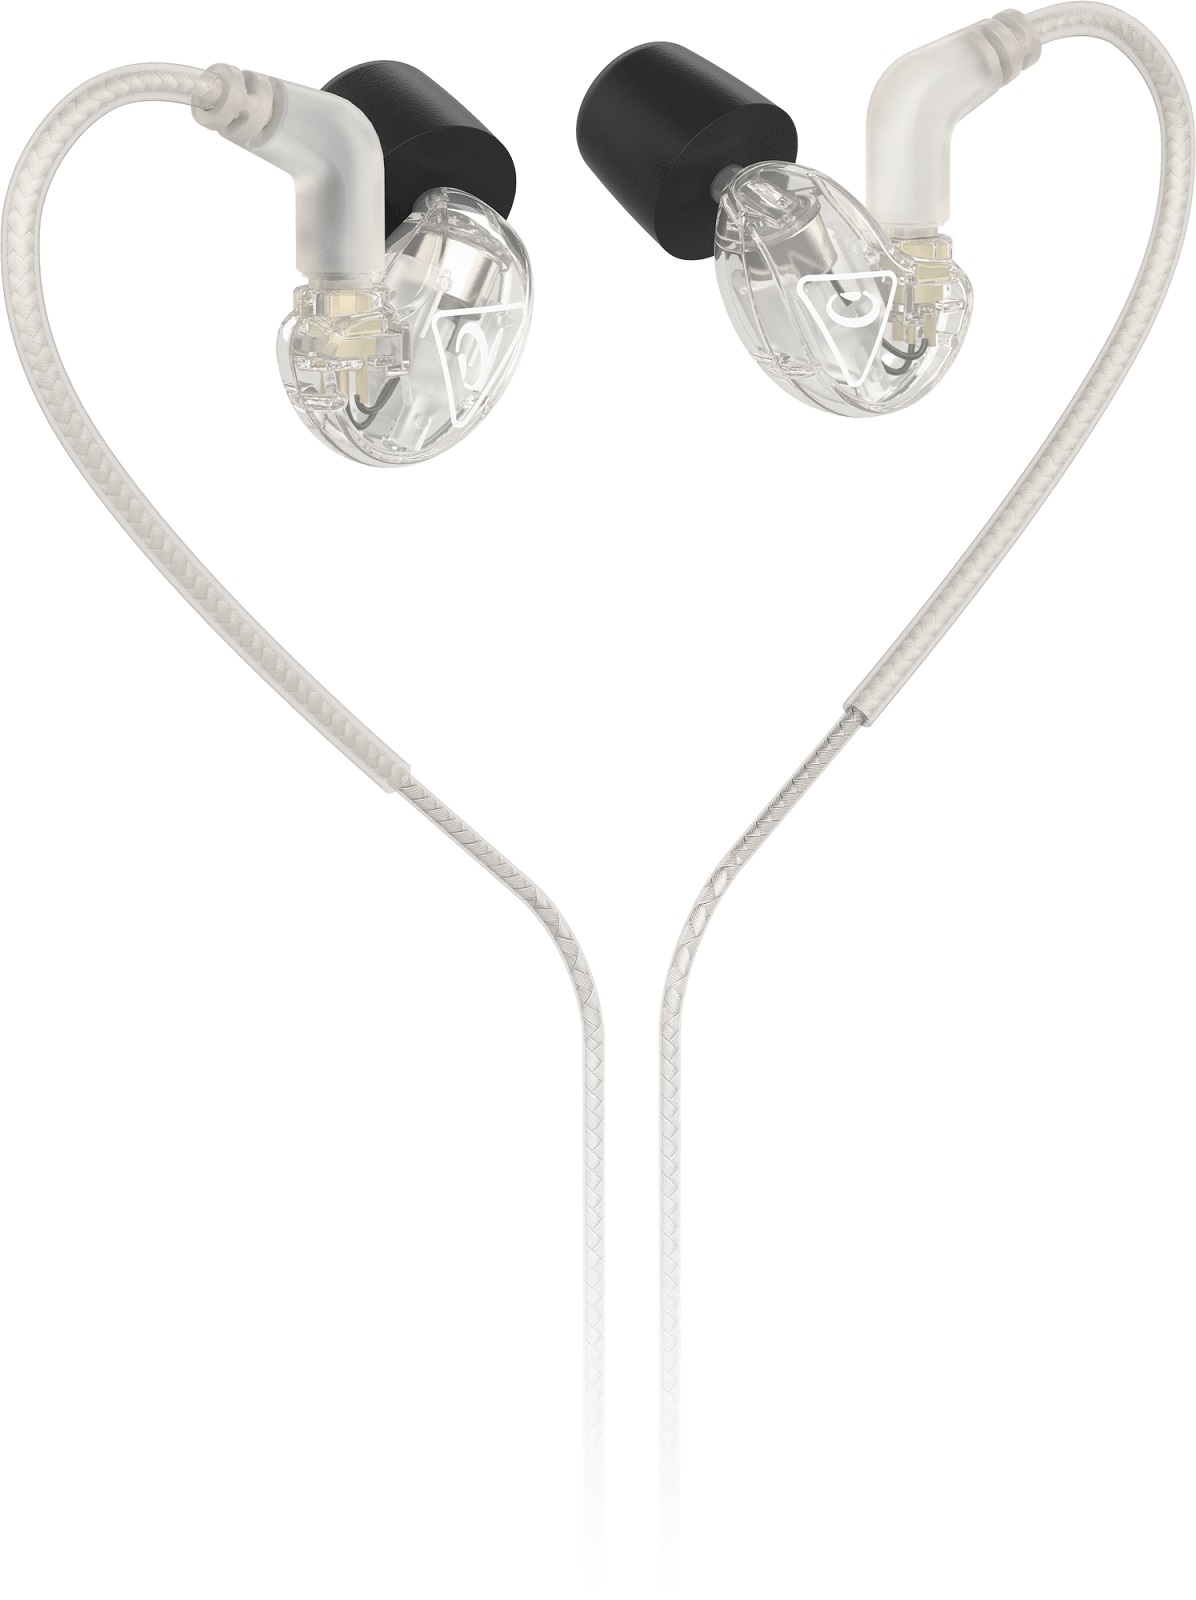 BEHRINGER SD251-CL AURICOLARE IN EAR MONITOR CLEAR TRASPARENTE 3